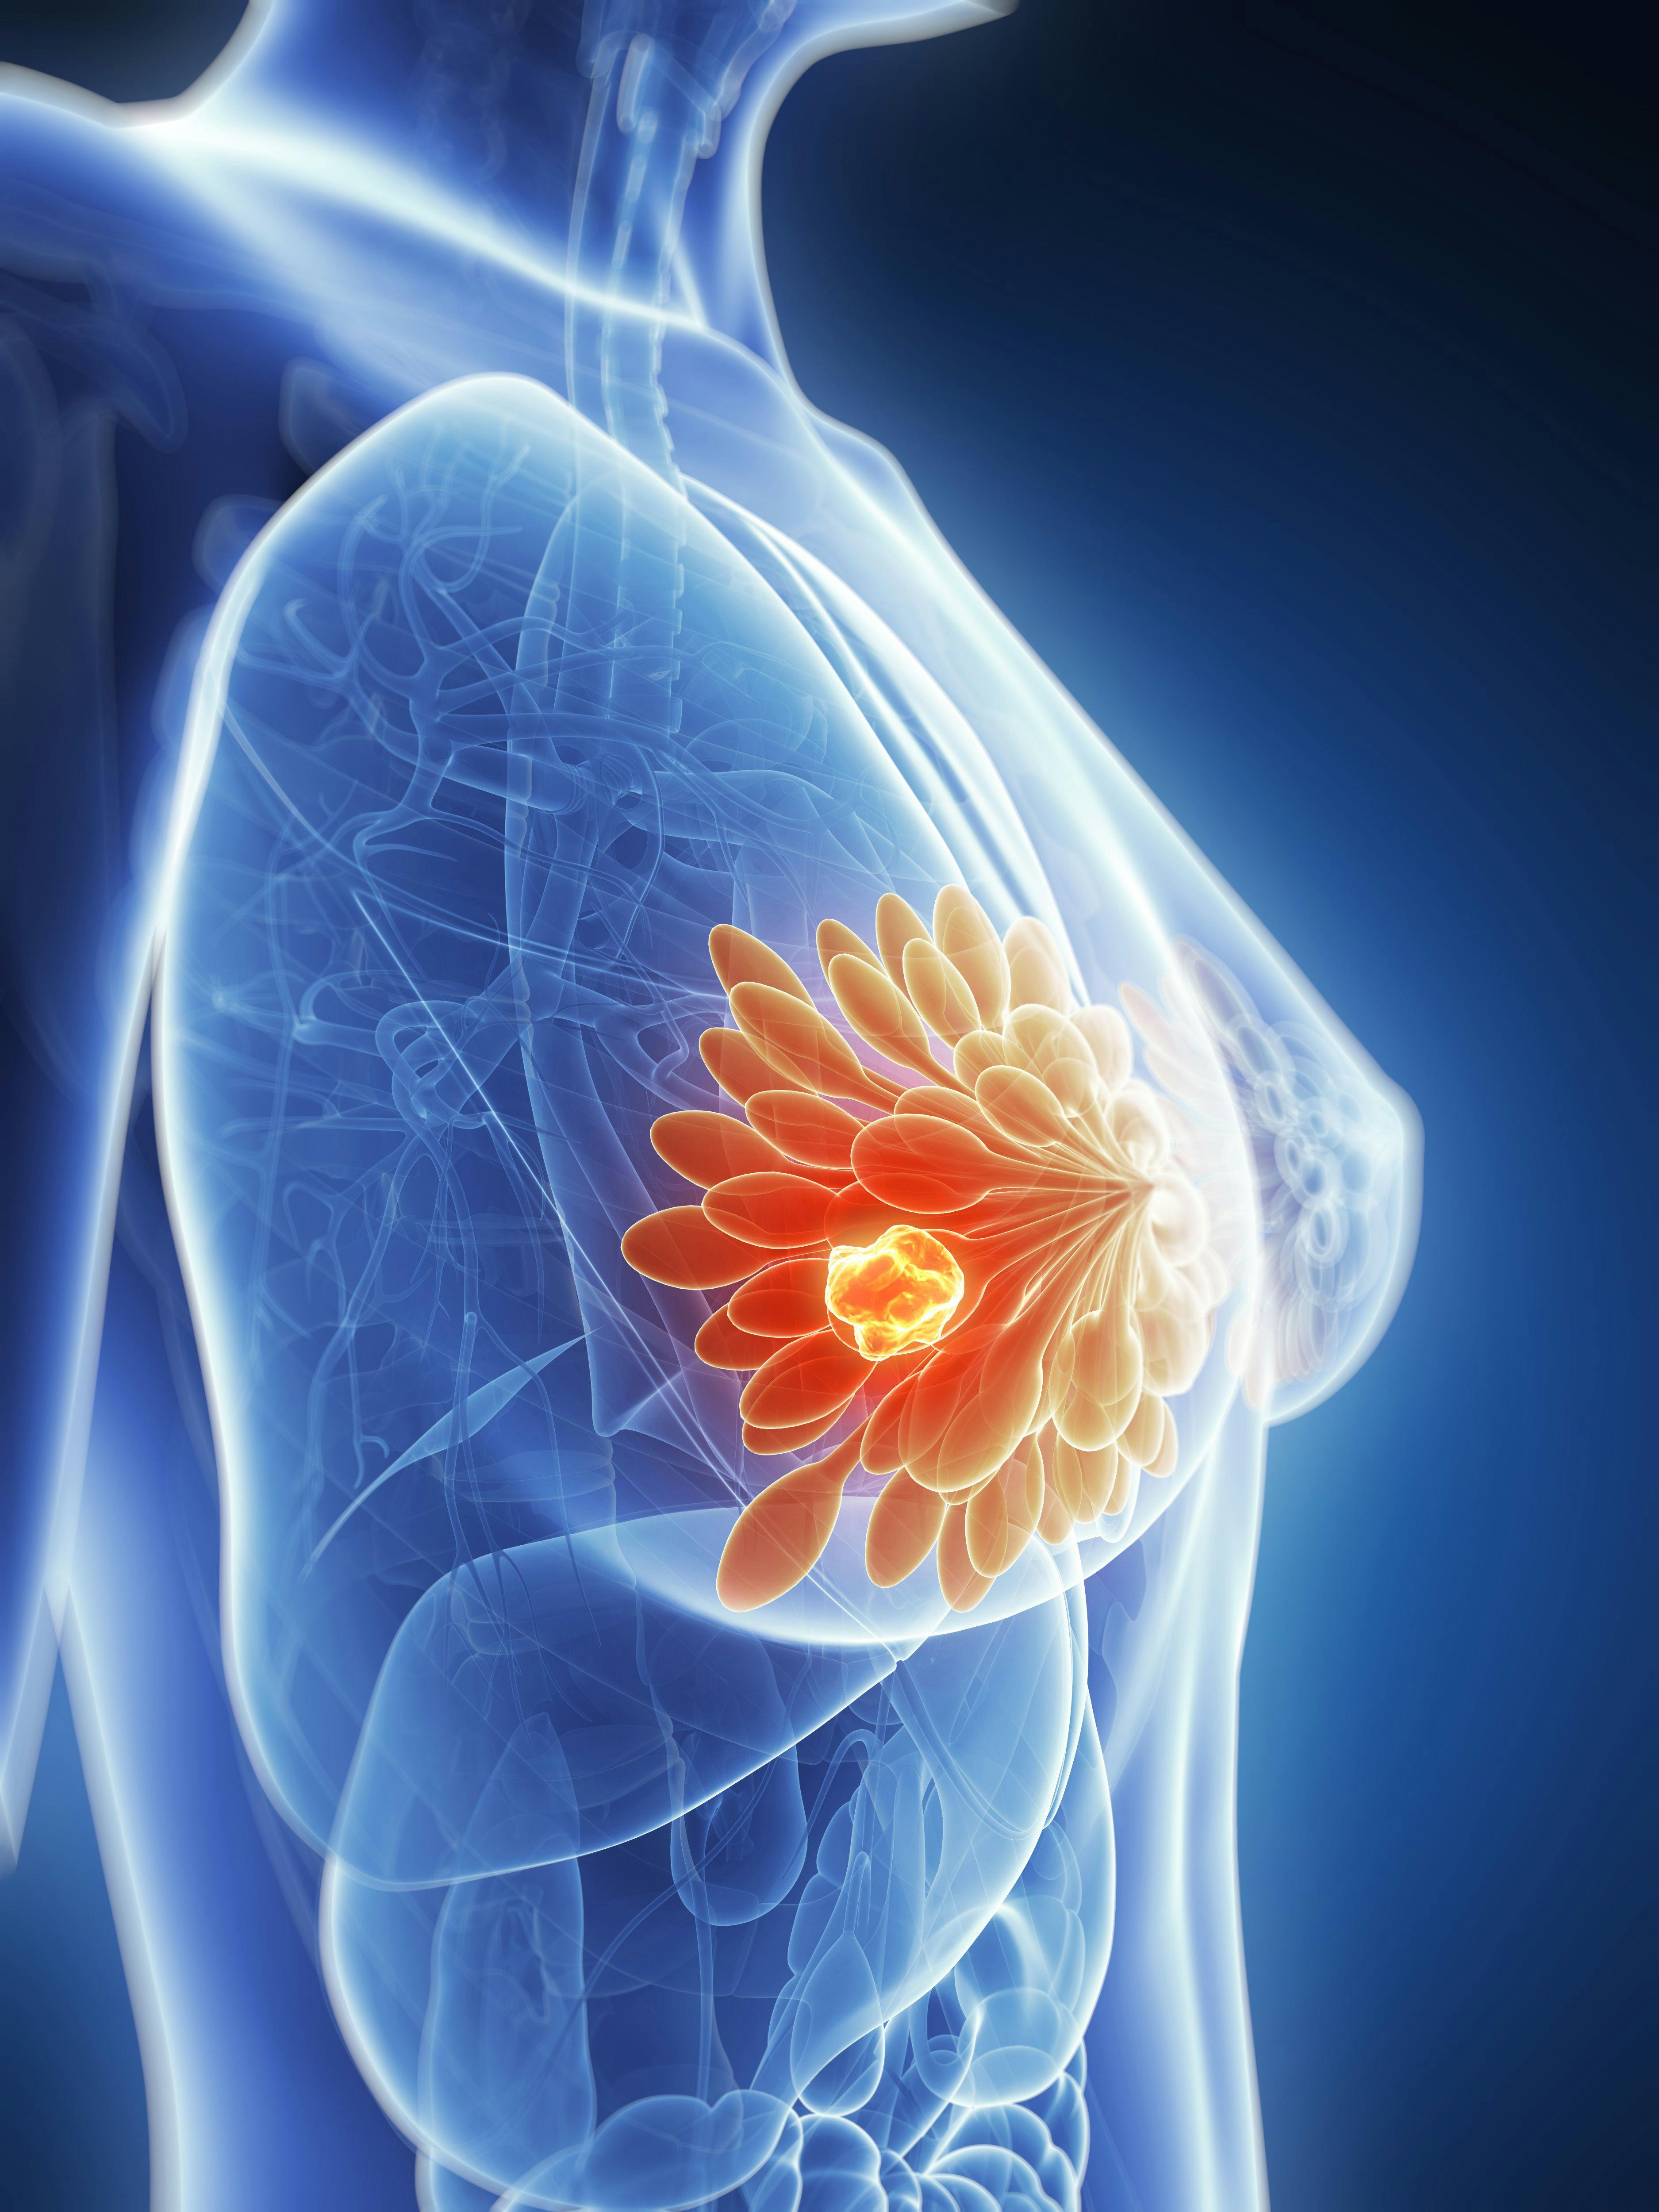 Adjuvant Palbociclib Plus Endocrine Therapy Did Not Show Benefit in Early HR+ HER2 Negative Breast Cancer